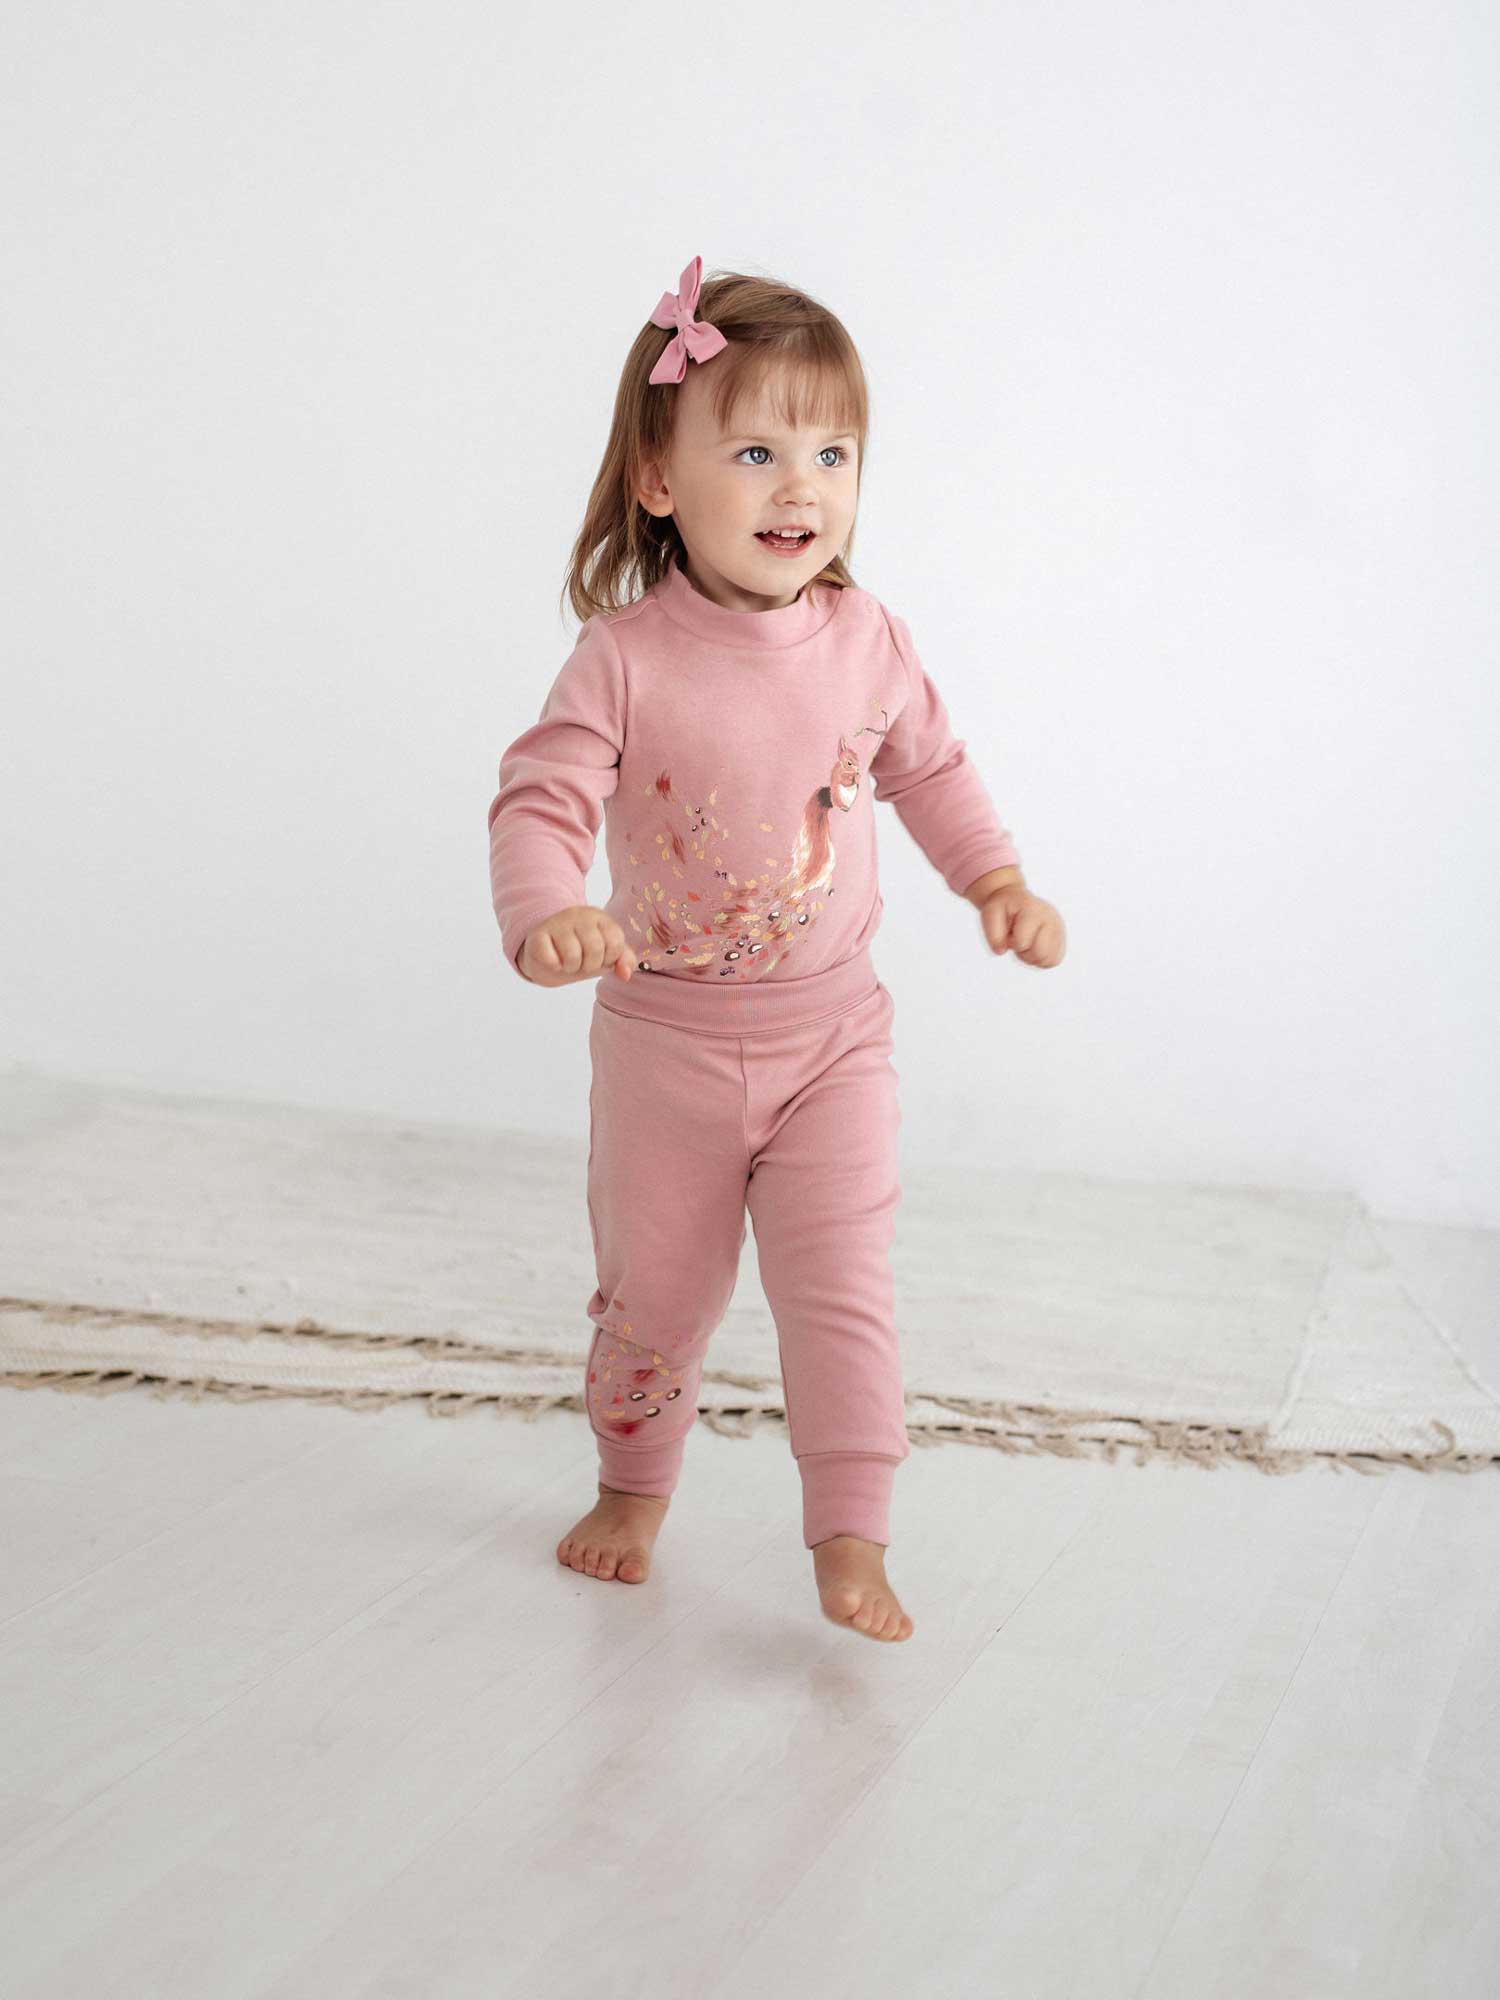 Even the cutest looks cuter in the cute infant pants with squirrel print